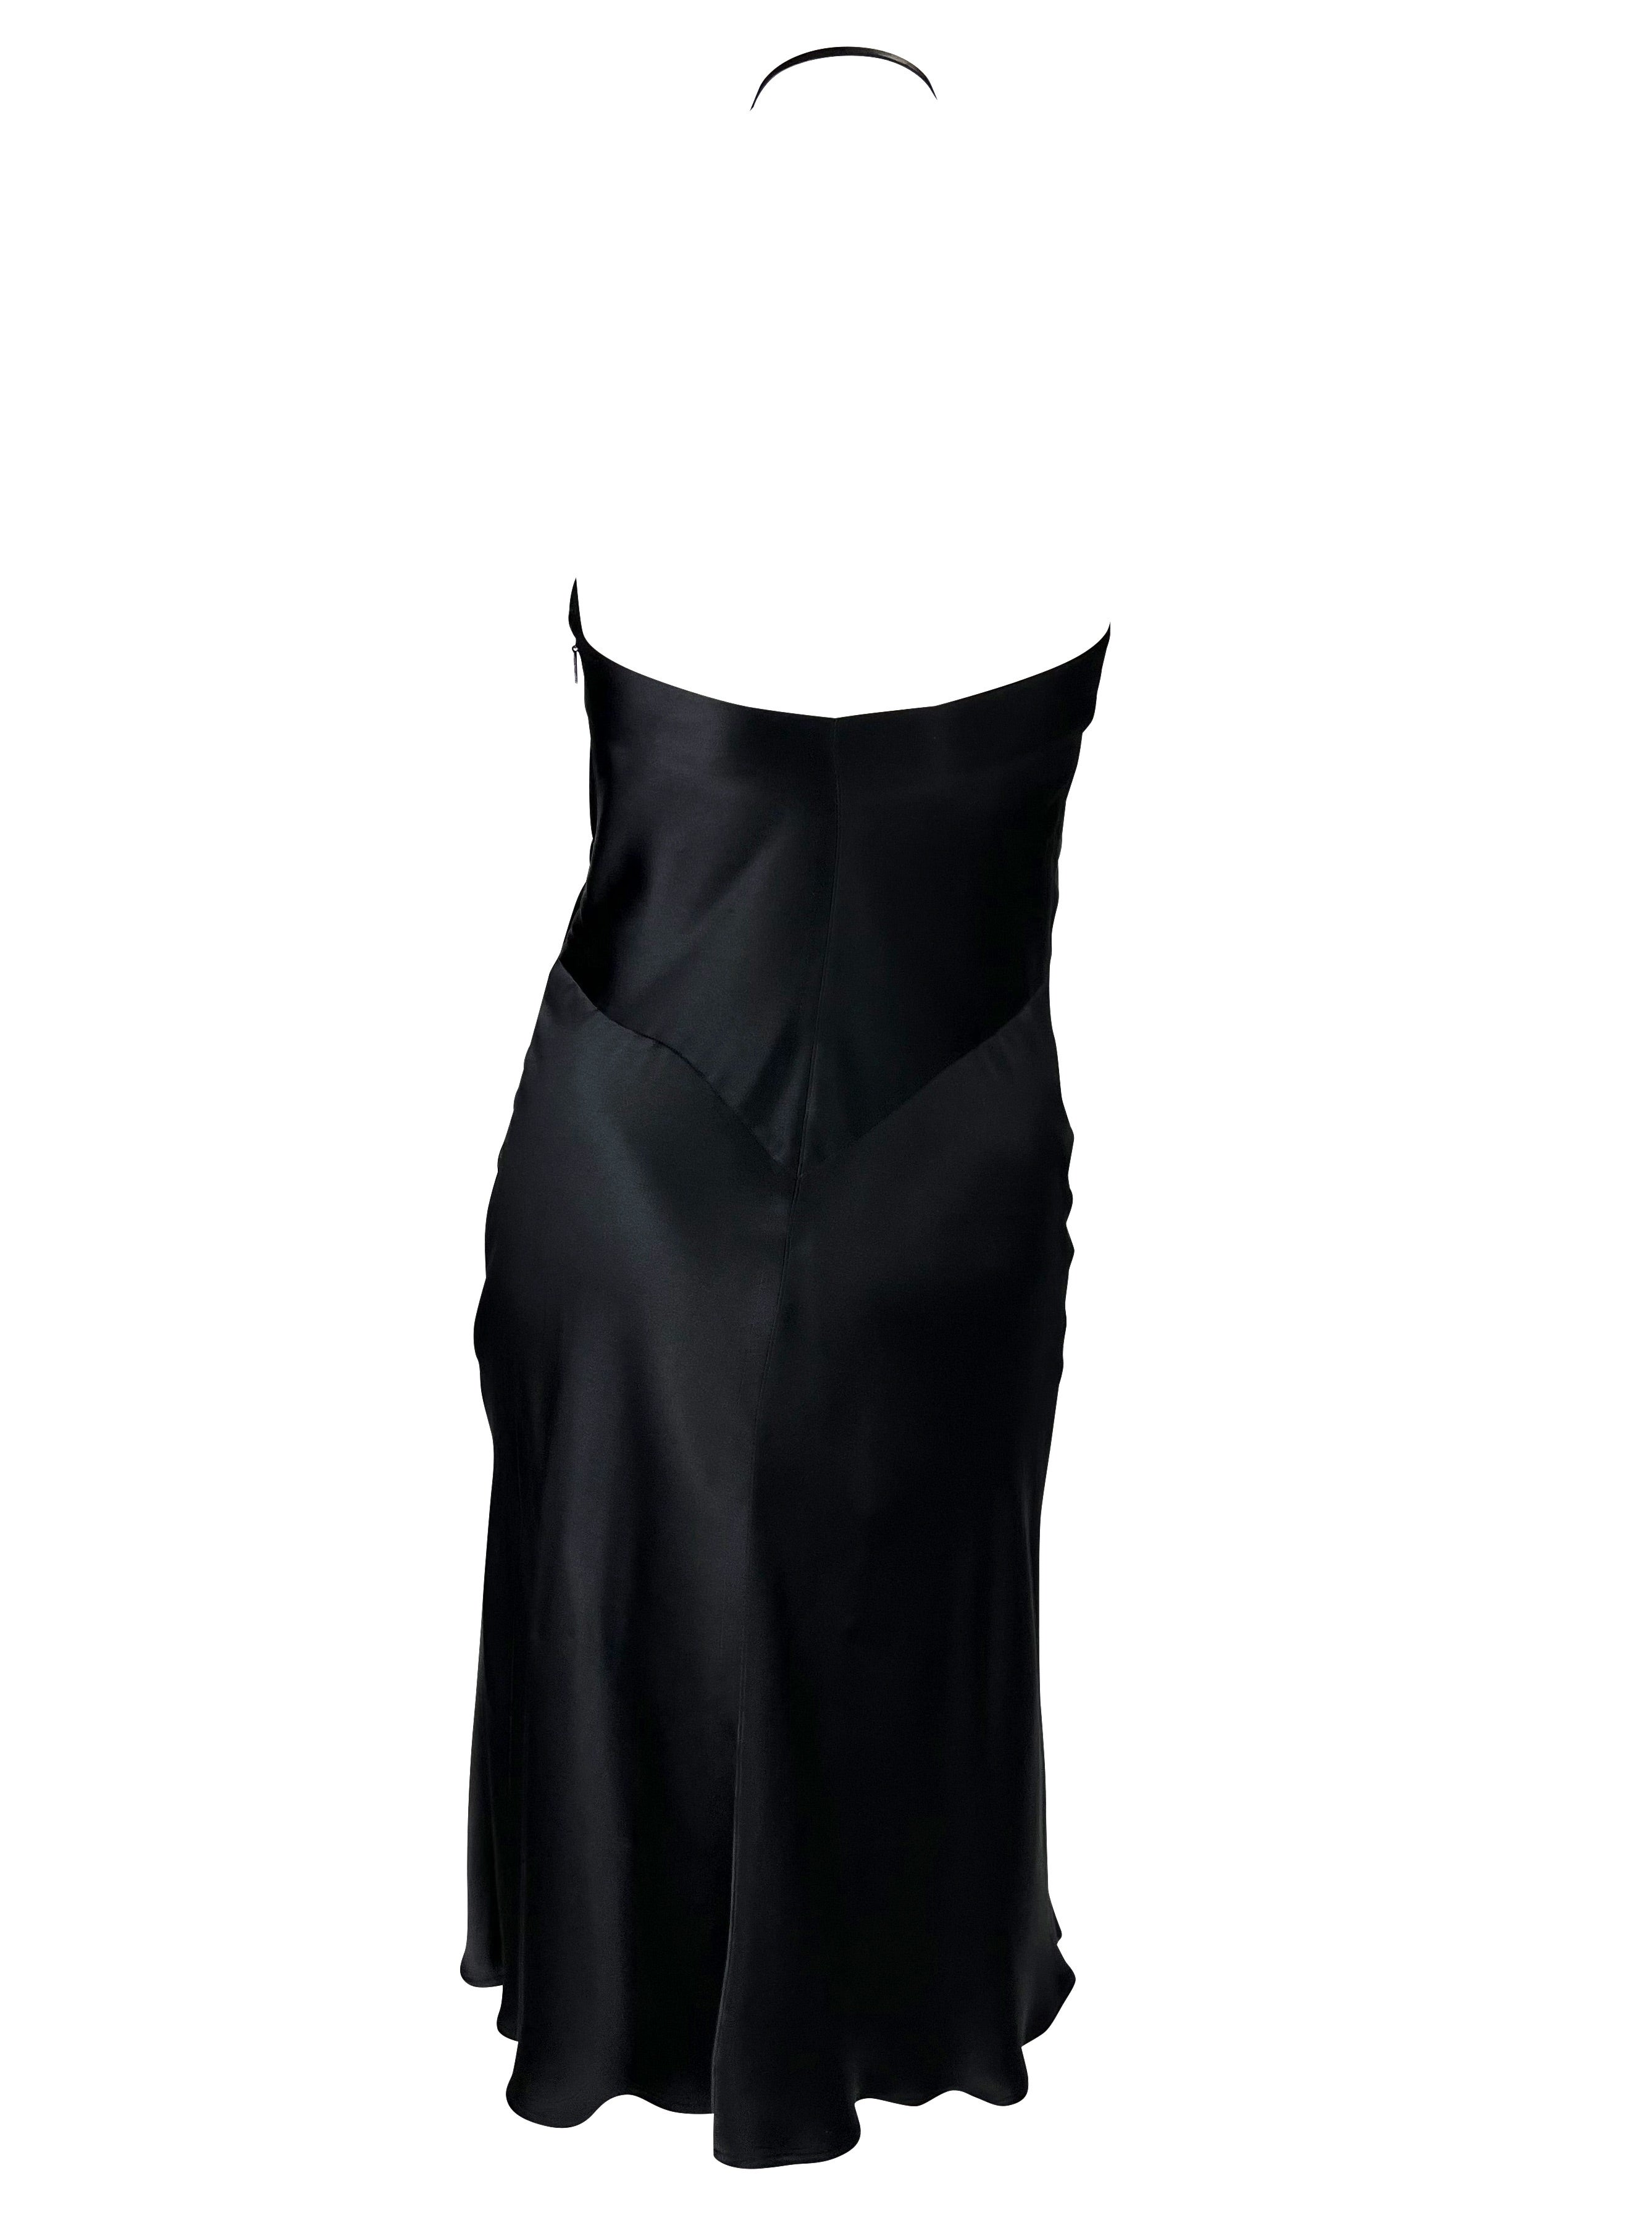 Women's S/S 2000 Gucci by Tom Ford Black Silk Satin Leather Bow Halter Flare Dress